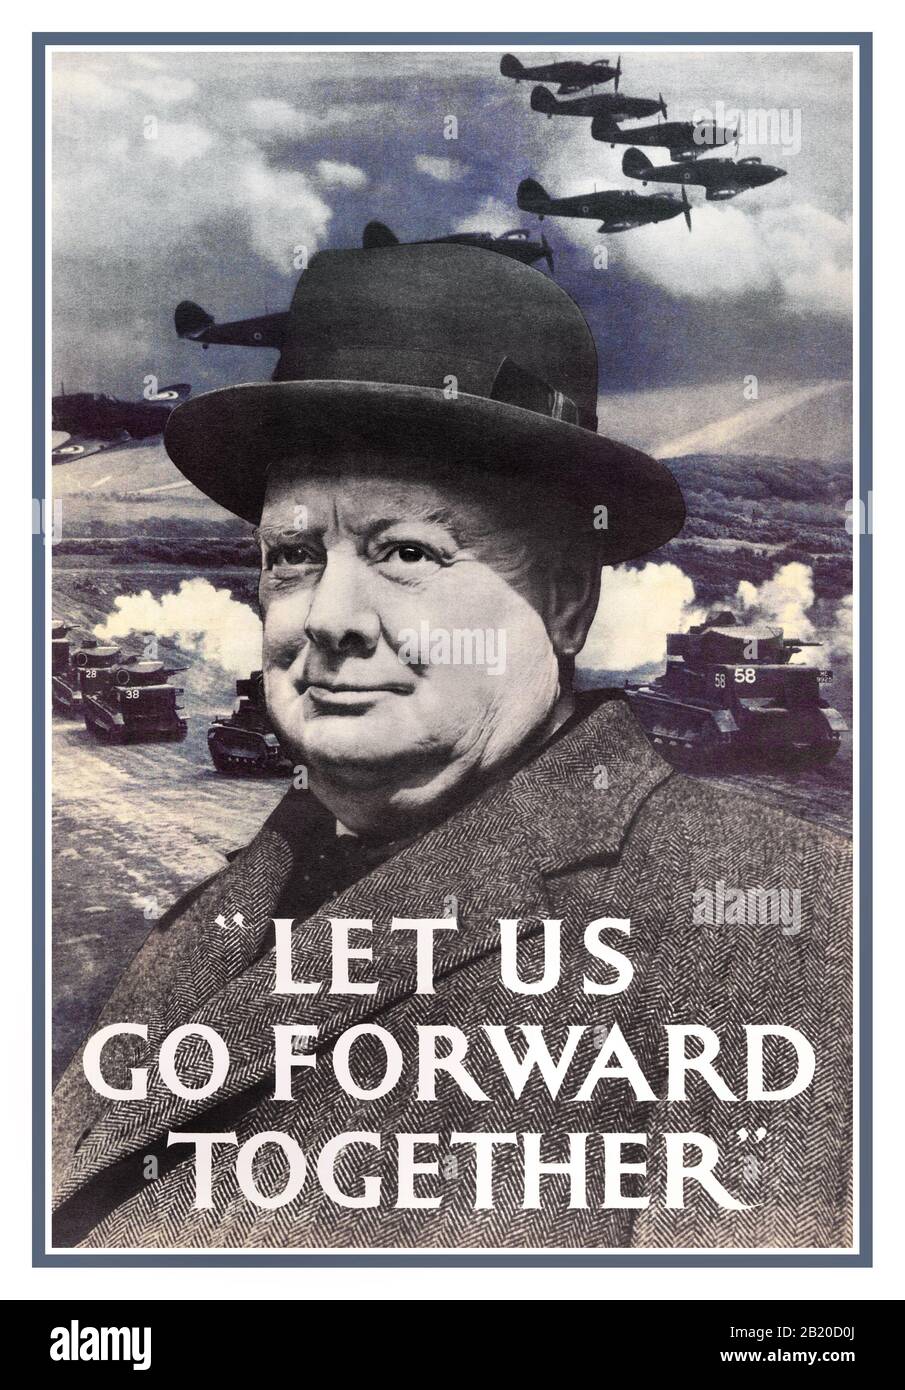 Vintage 1940's WW2 UK Propaganda Winston Churchill Portrait British WW2 Propaganda Poster 'LET US GO FORWARD TOGETHER' with tanks and spitfire fighter planes in background. Motivational Great Britain Wartime poster featuring Winston Churchill Prime Minister and revered war leader. Stock Photo